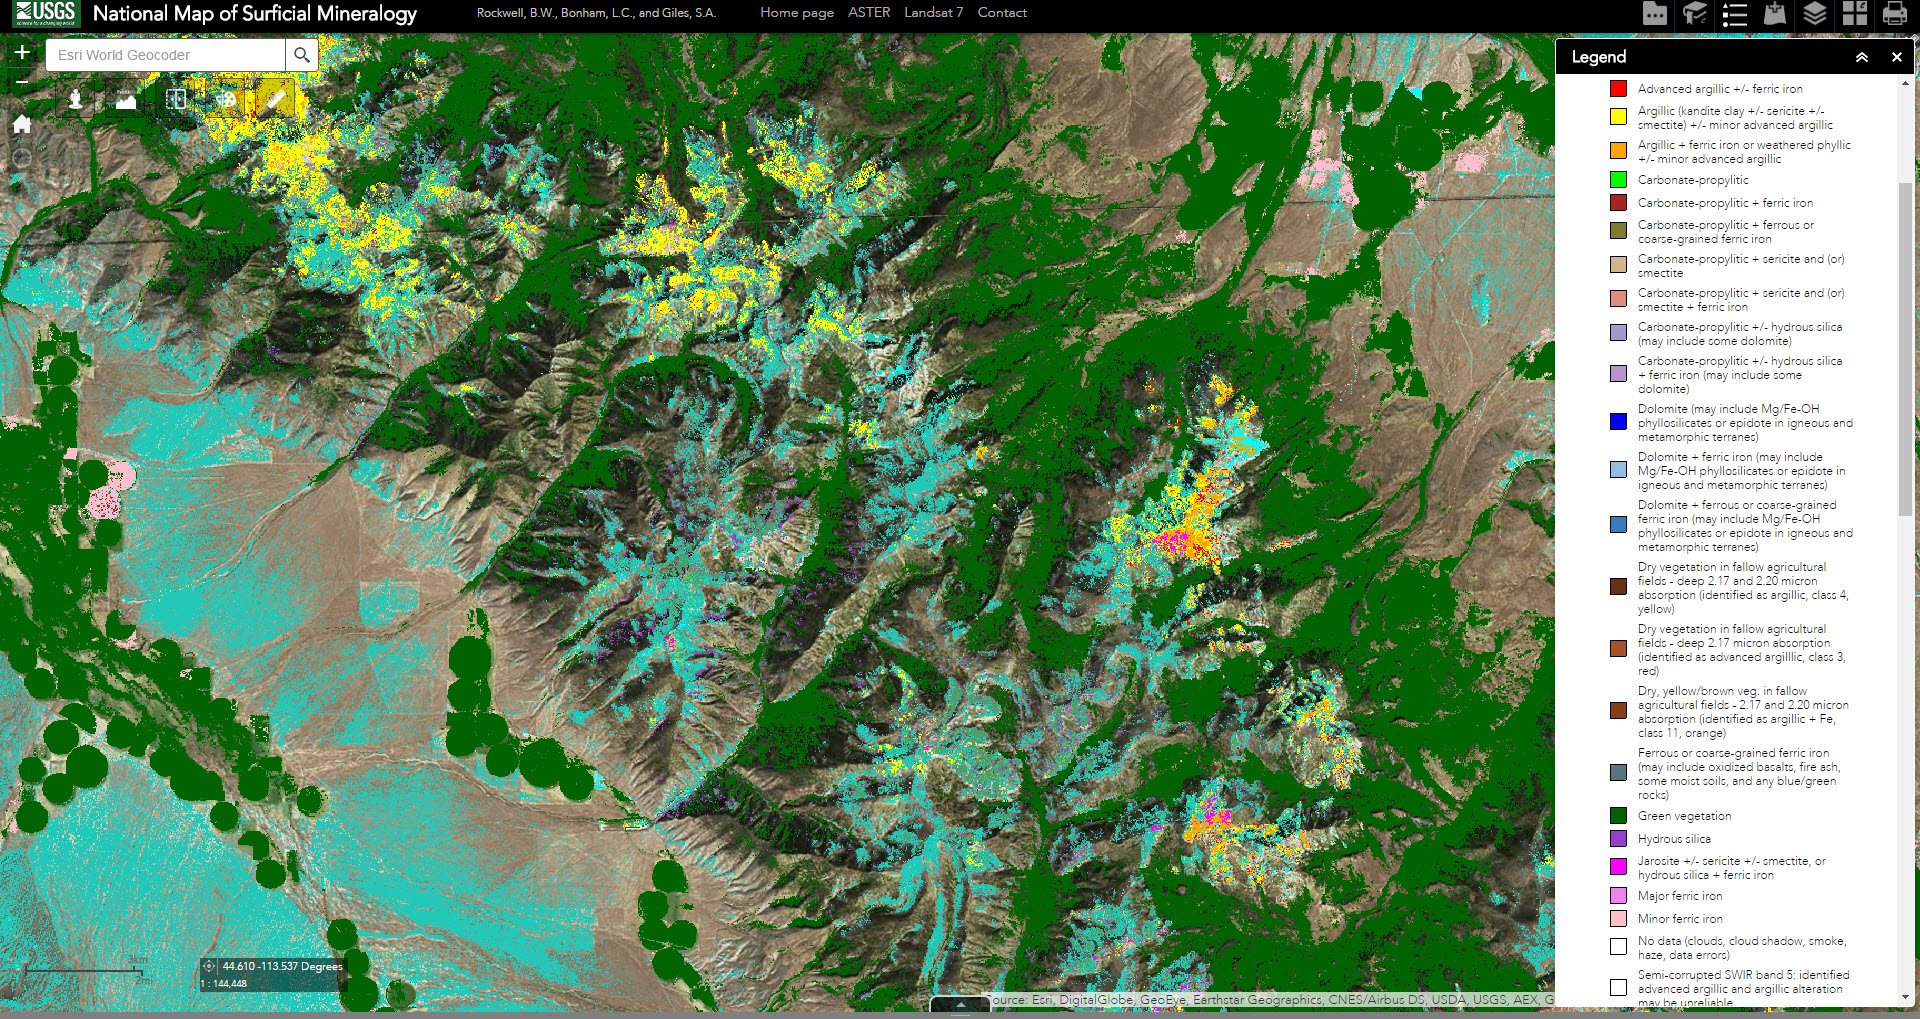 Screen shot of ASTER data over Lemhi County, Idaho, United States from the National Map of Surficial Mineralogy.